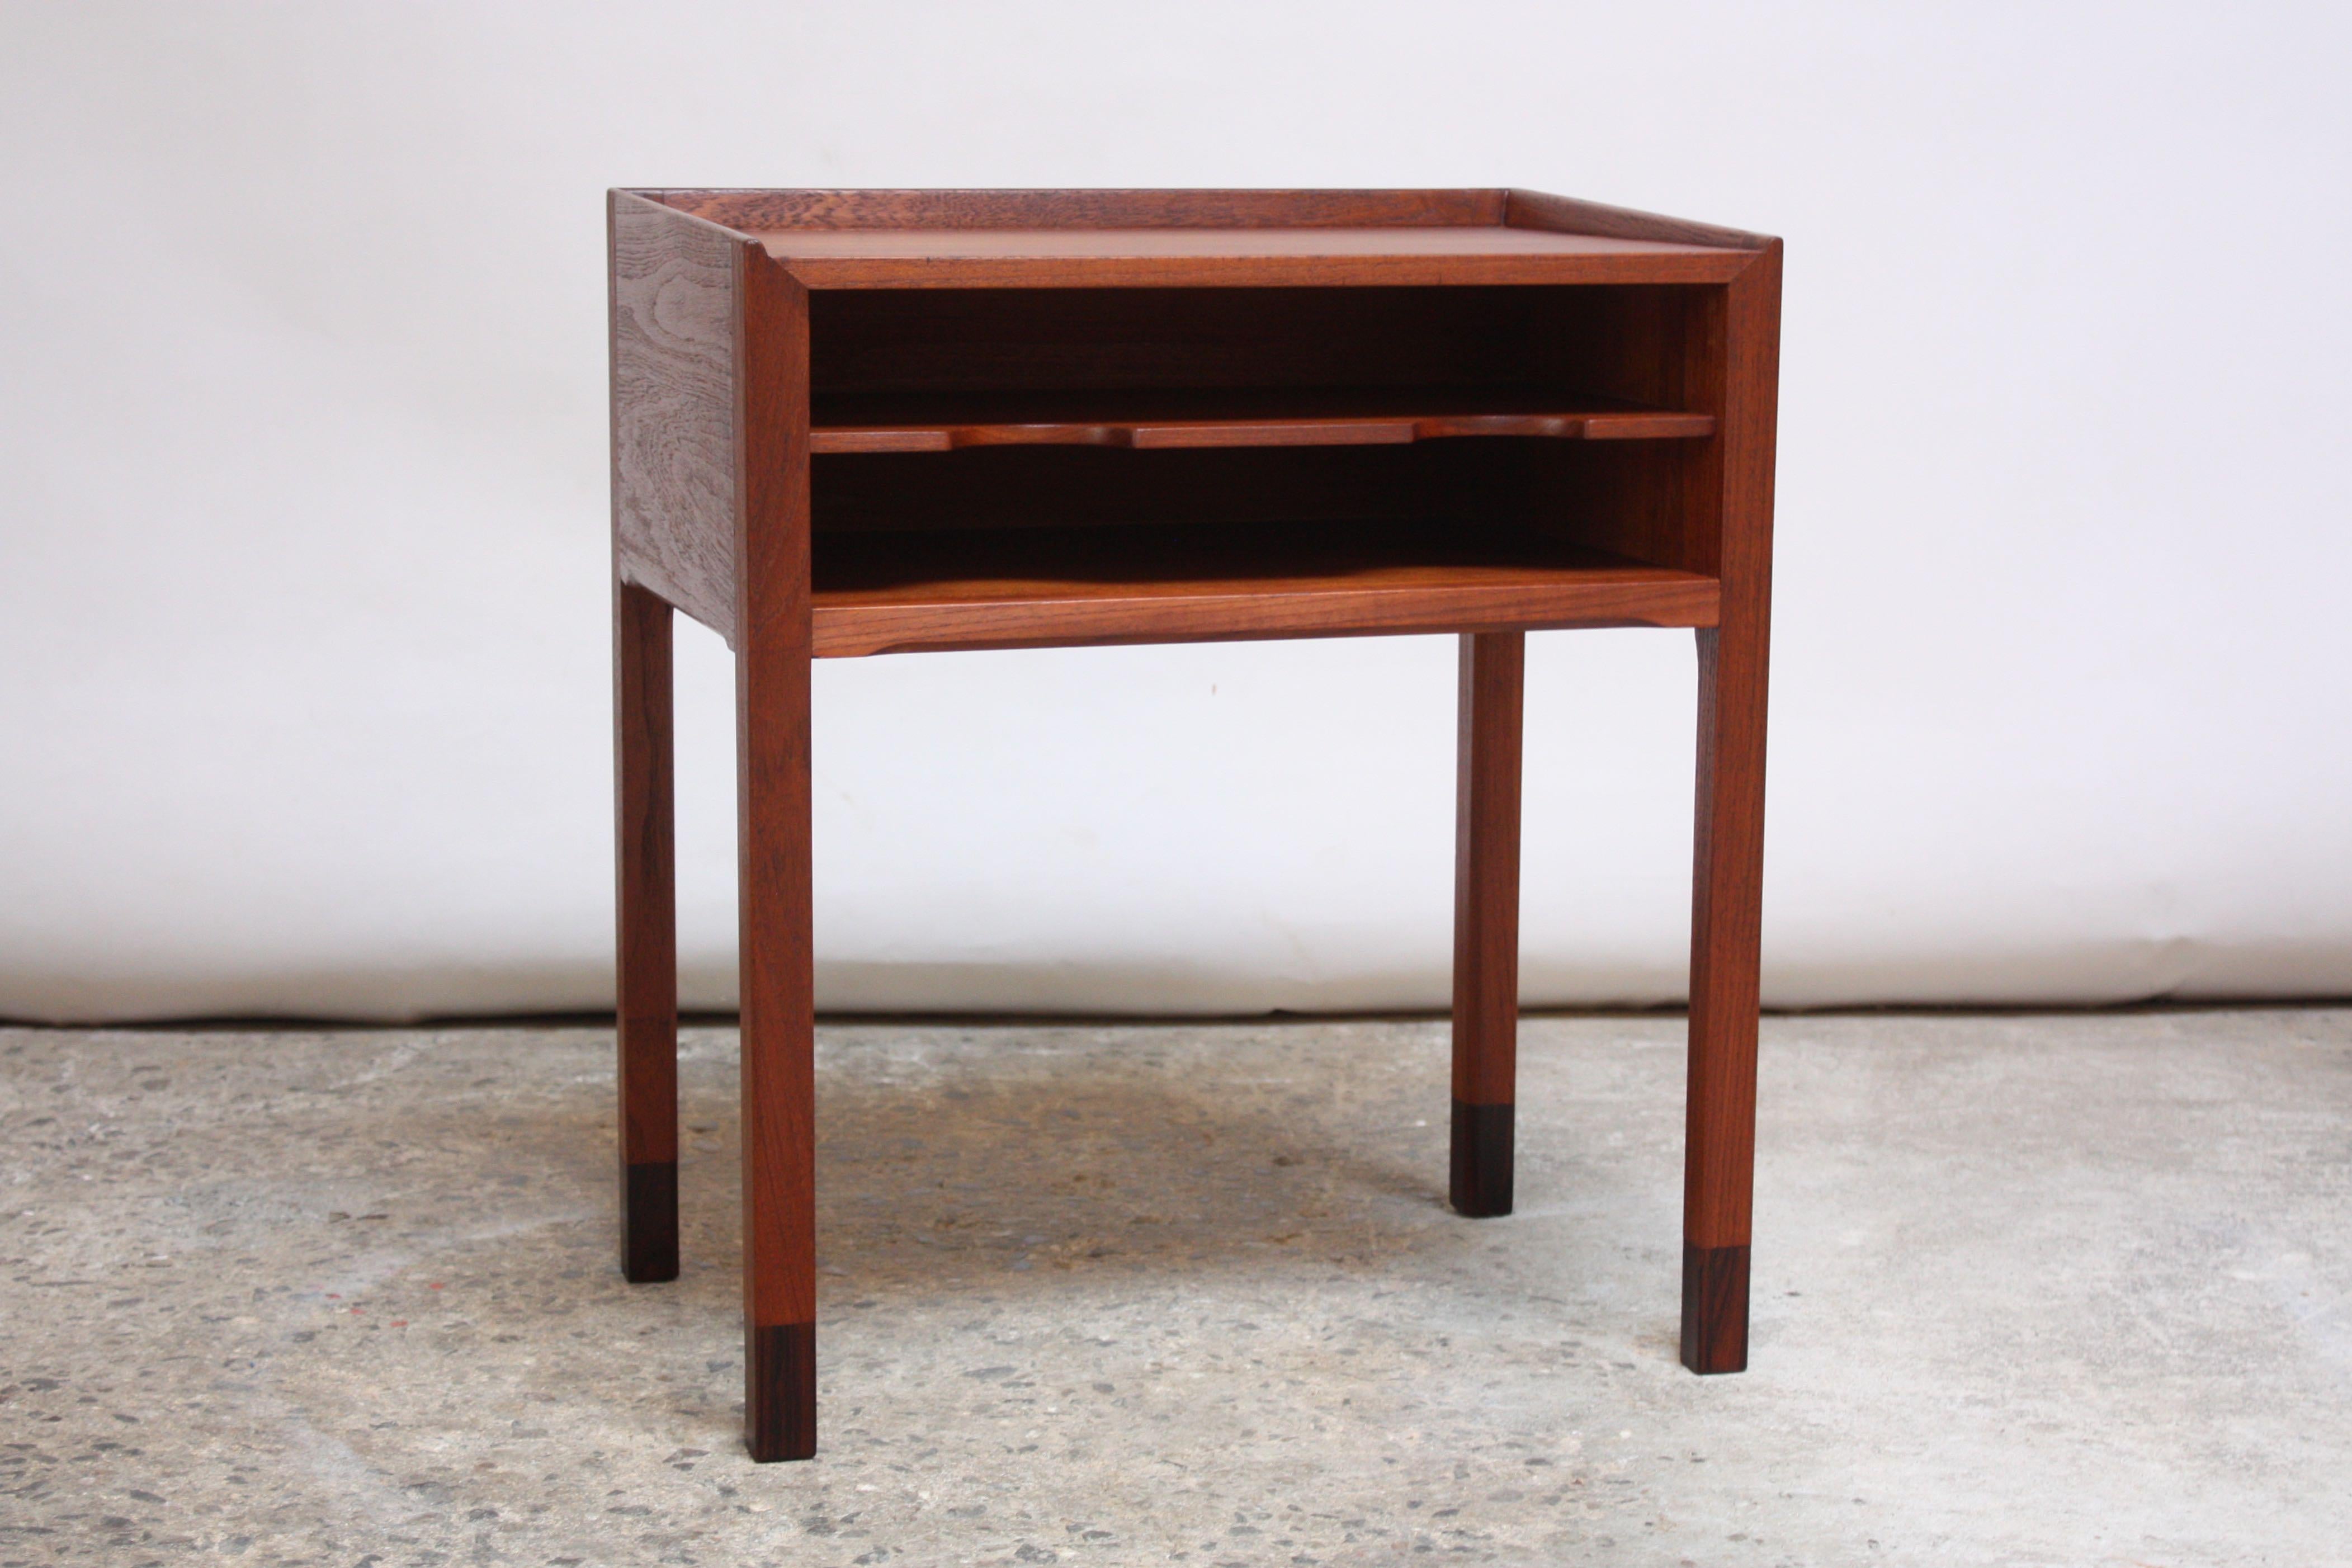 Danish Teak and Rosewood Side Table Designed for the Rigspolitiet Headquarters In Good Condition For Sale In Brooklyn, NY